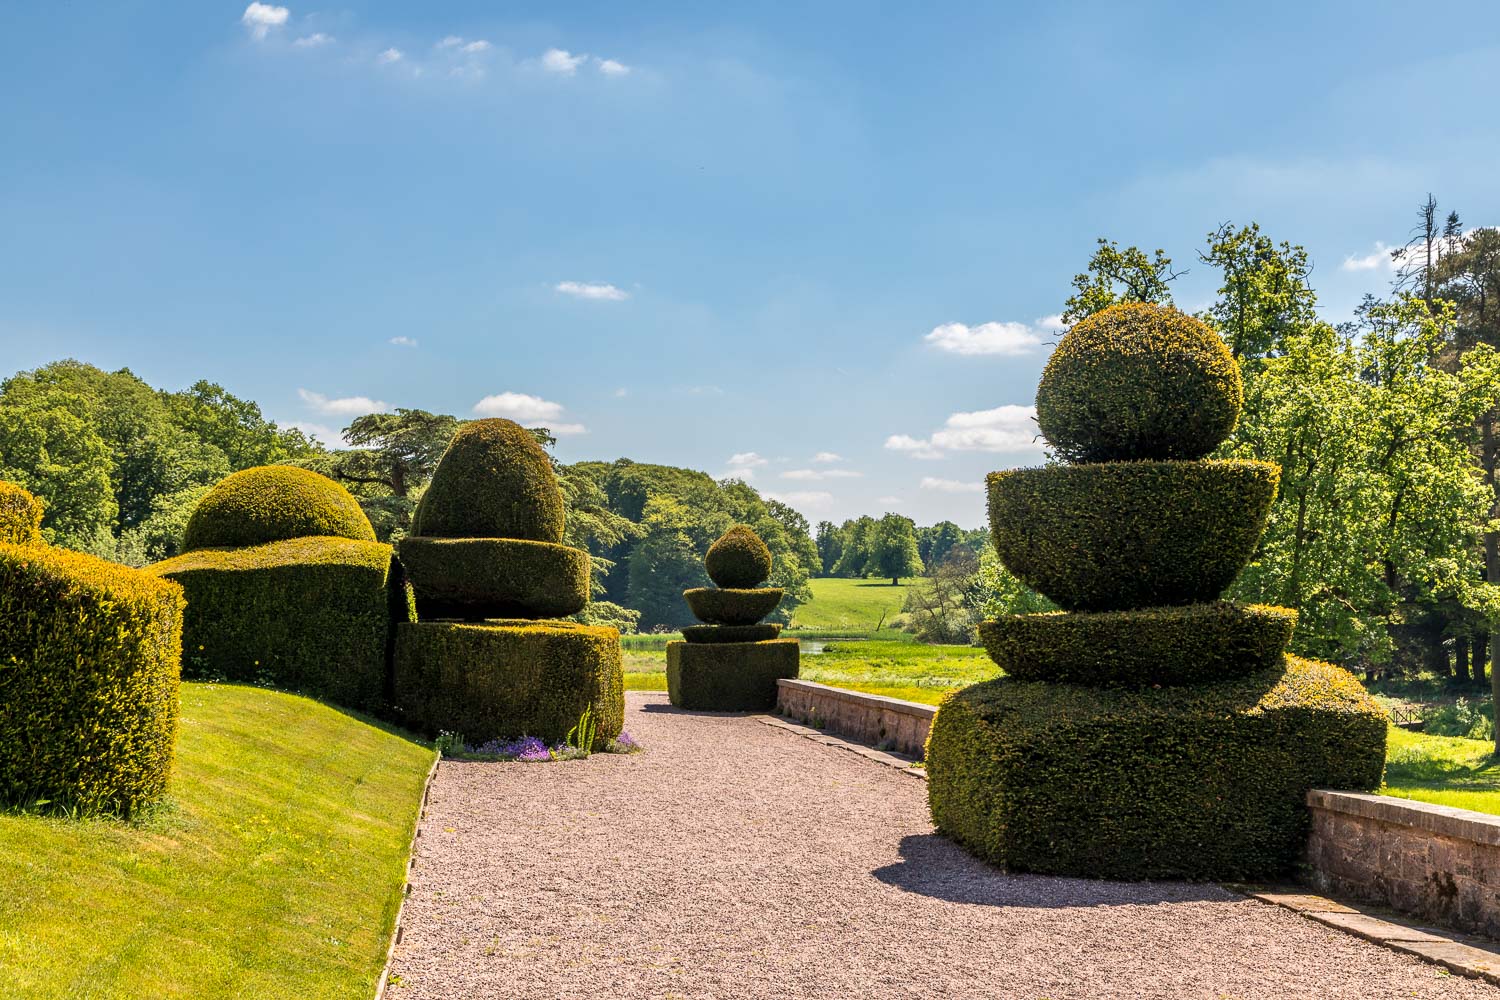 Hutton-in-the-Forest topiary